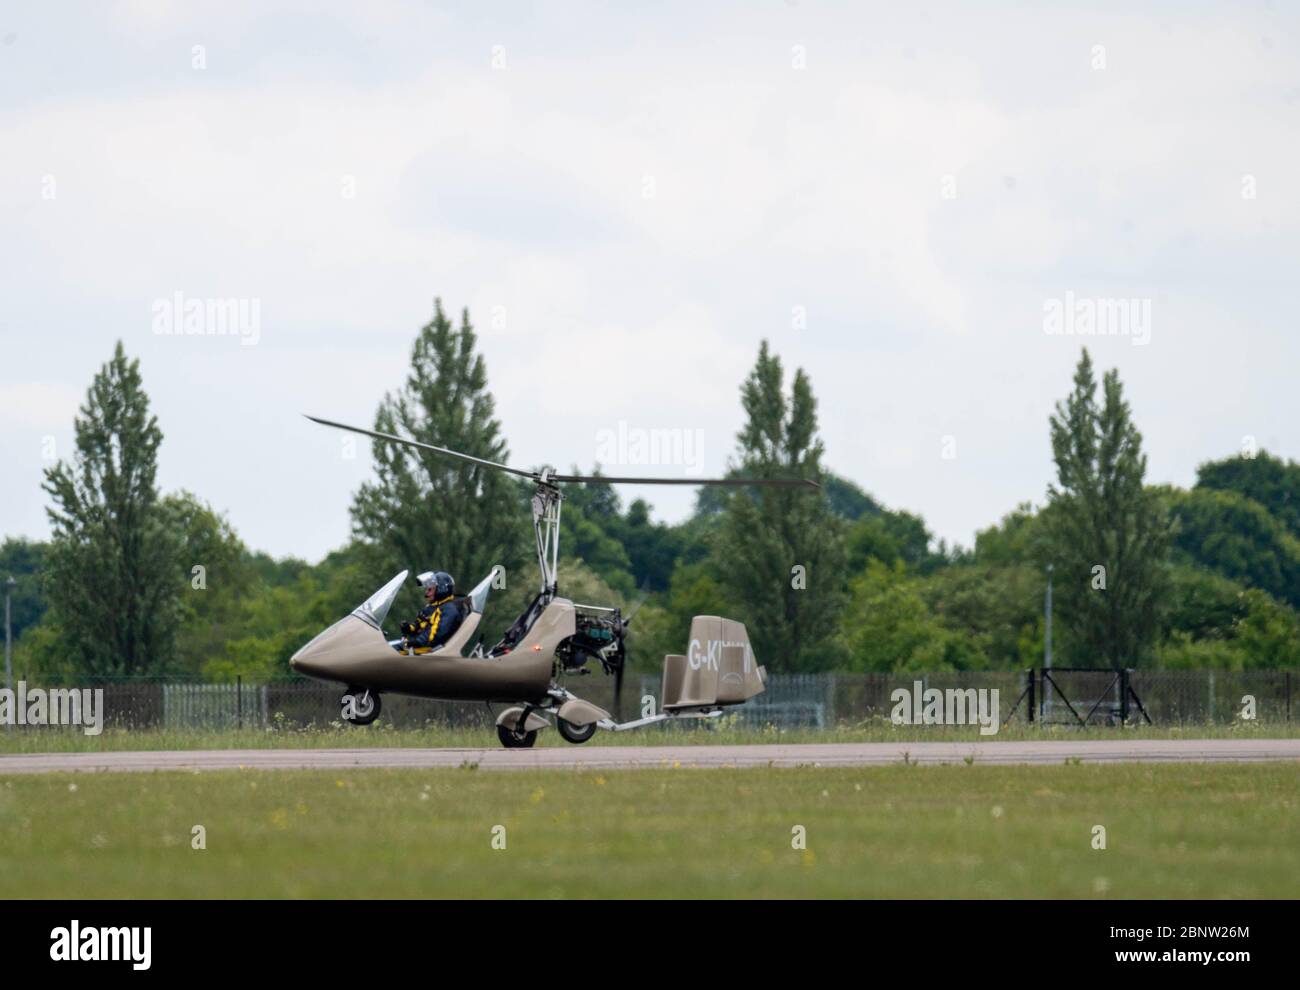 North Weald Essex, UK. 16th May, 2020. General Aviation (Private and recreational flights) resume in England, North Weald Airfield reopens after the lockdown for civil and private flying subject to strict social distancing guidelines An autogyro tkes off Credit: Ian Davidson/Alamy Live News Stock Photo